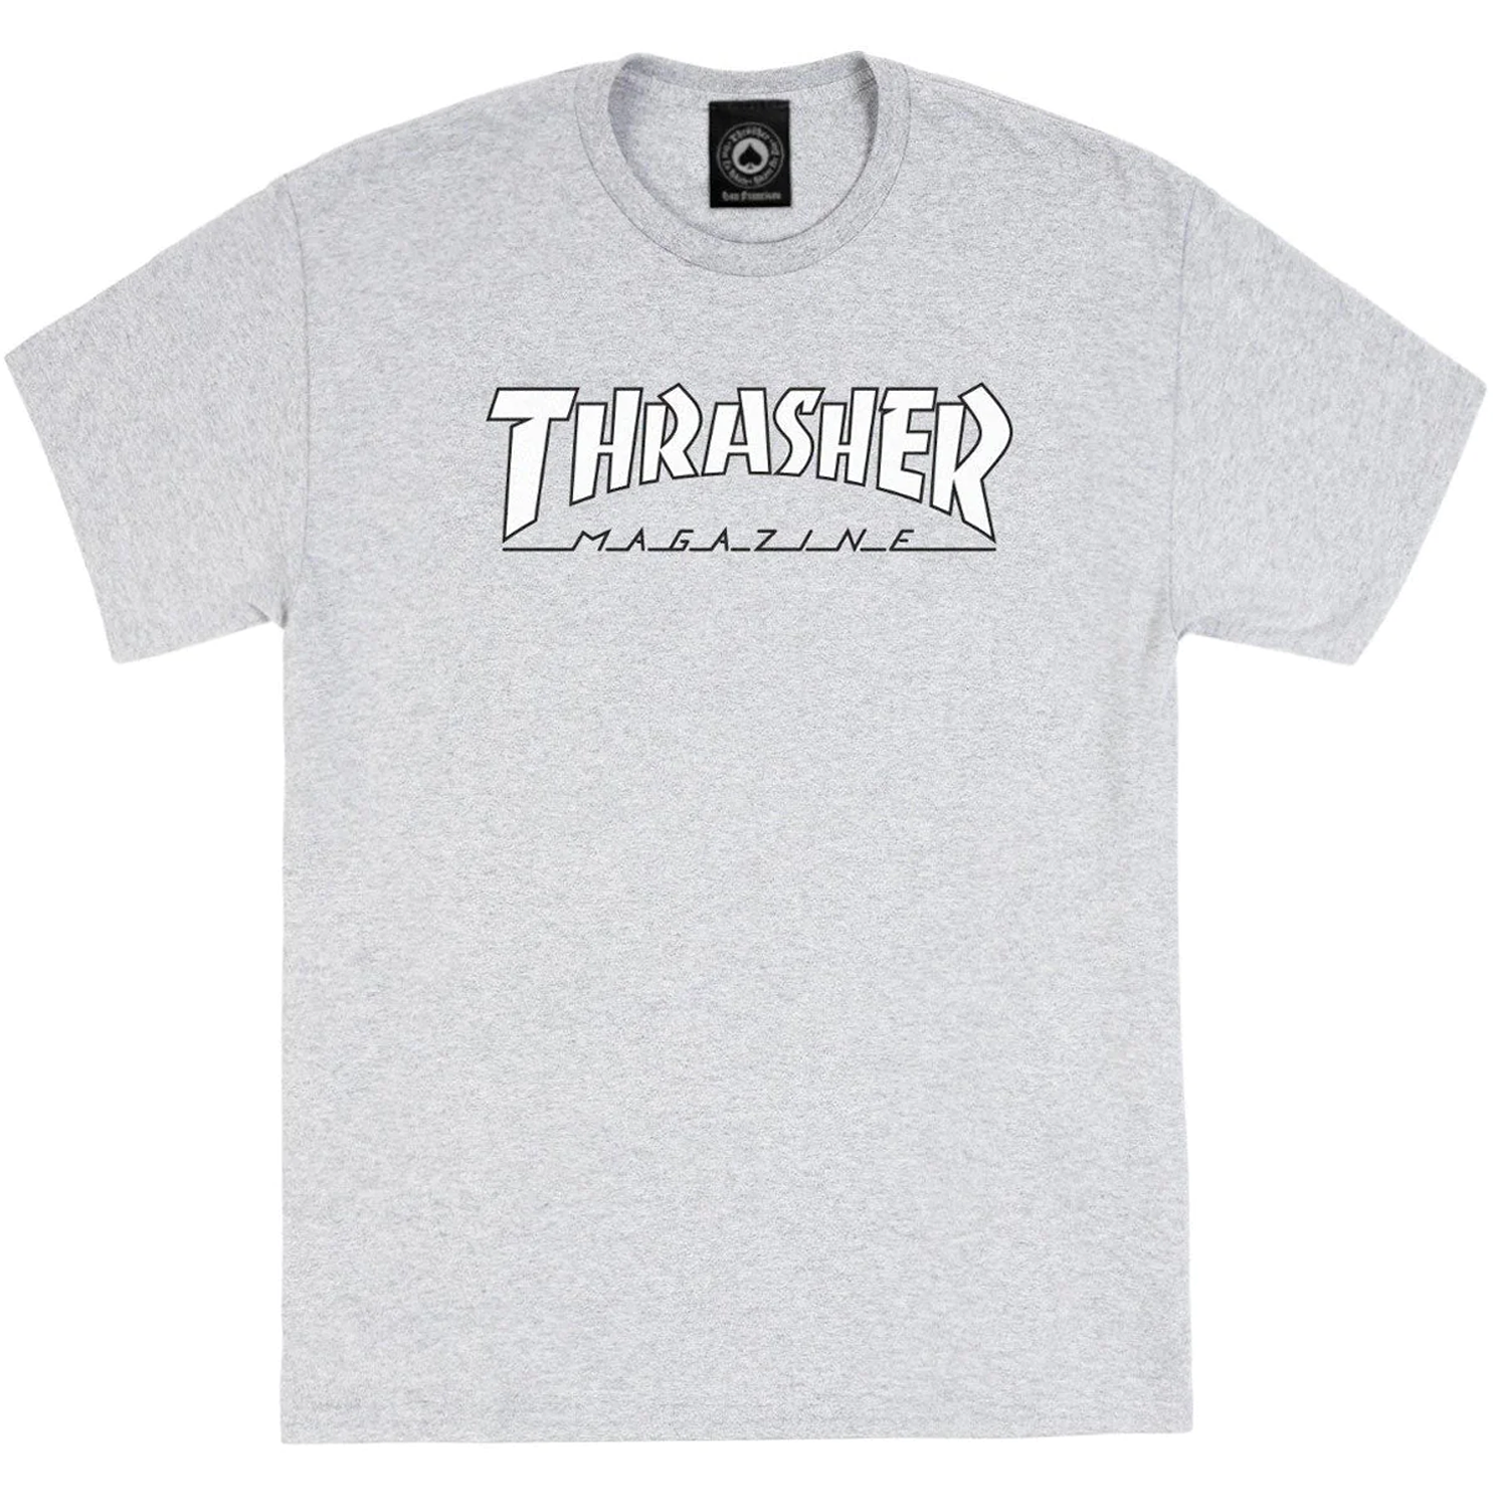 Polo Thrasher Outlined Gray White